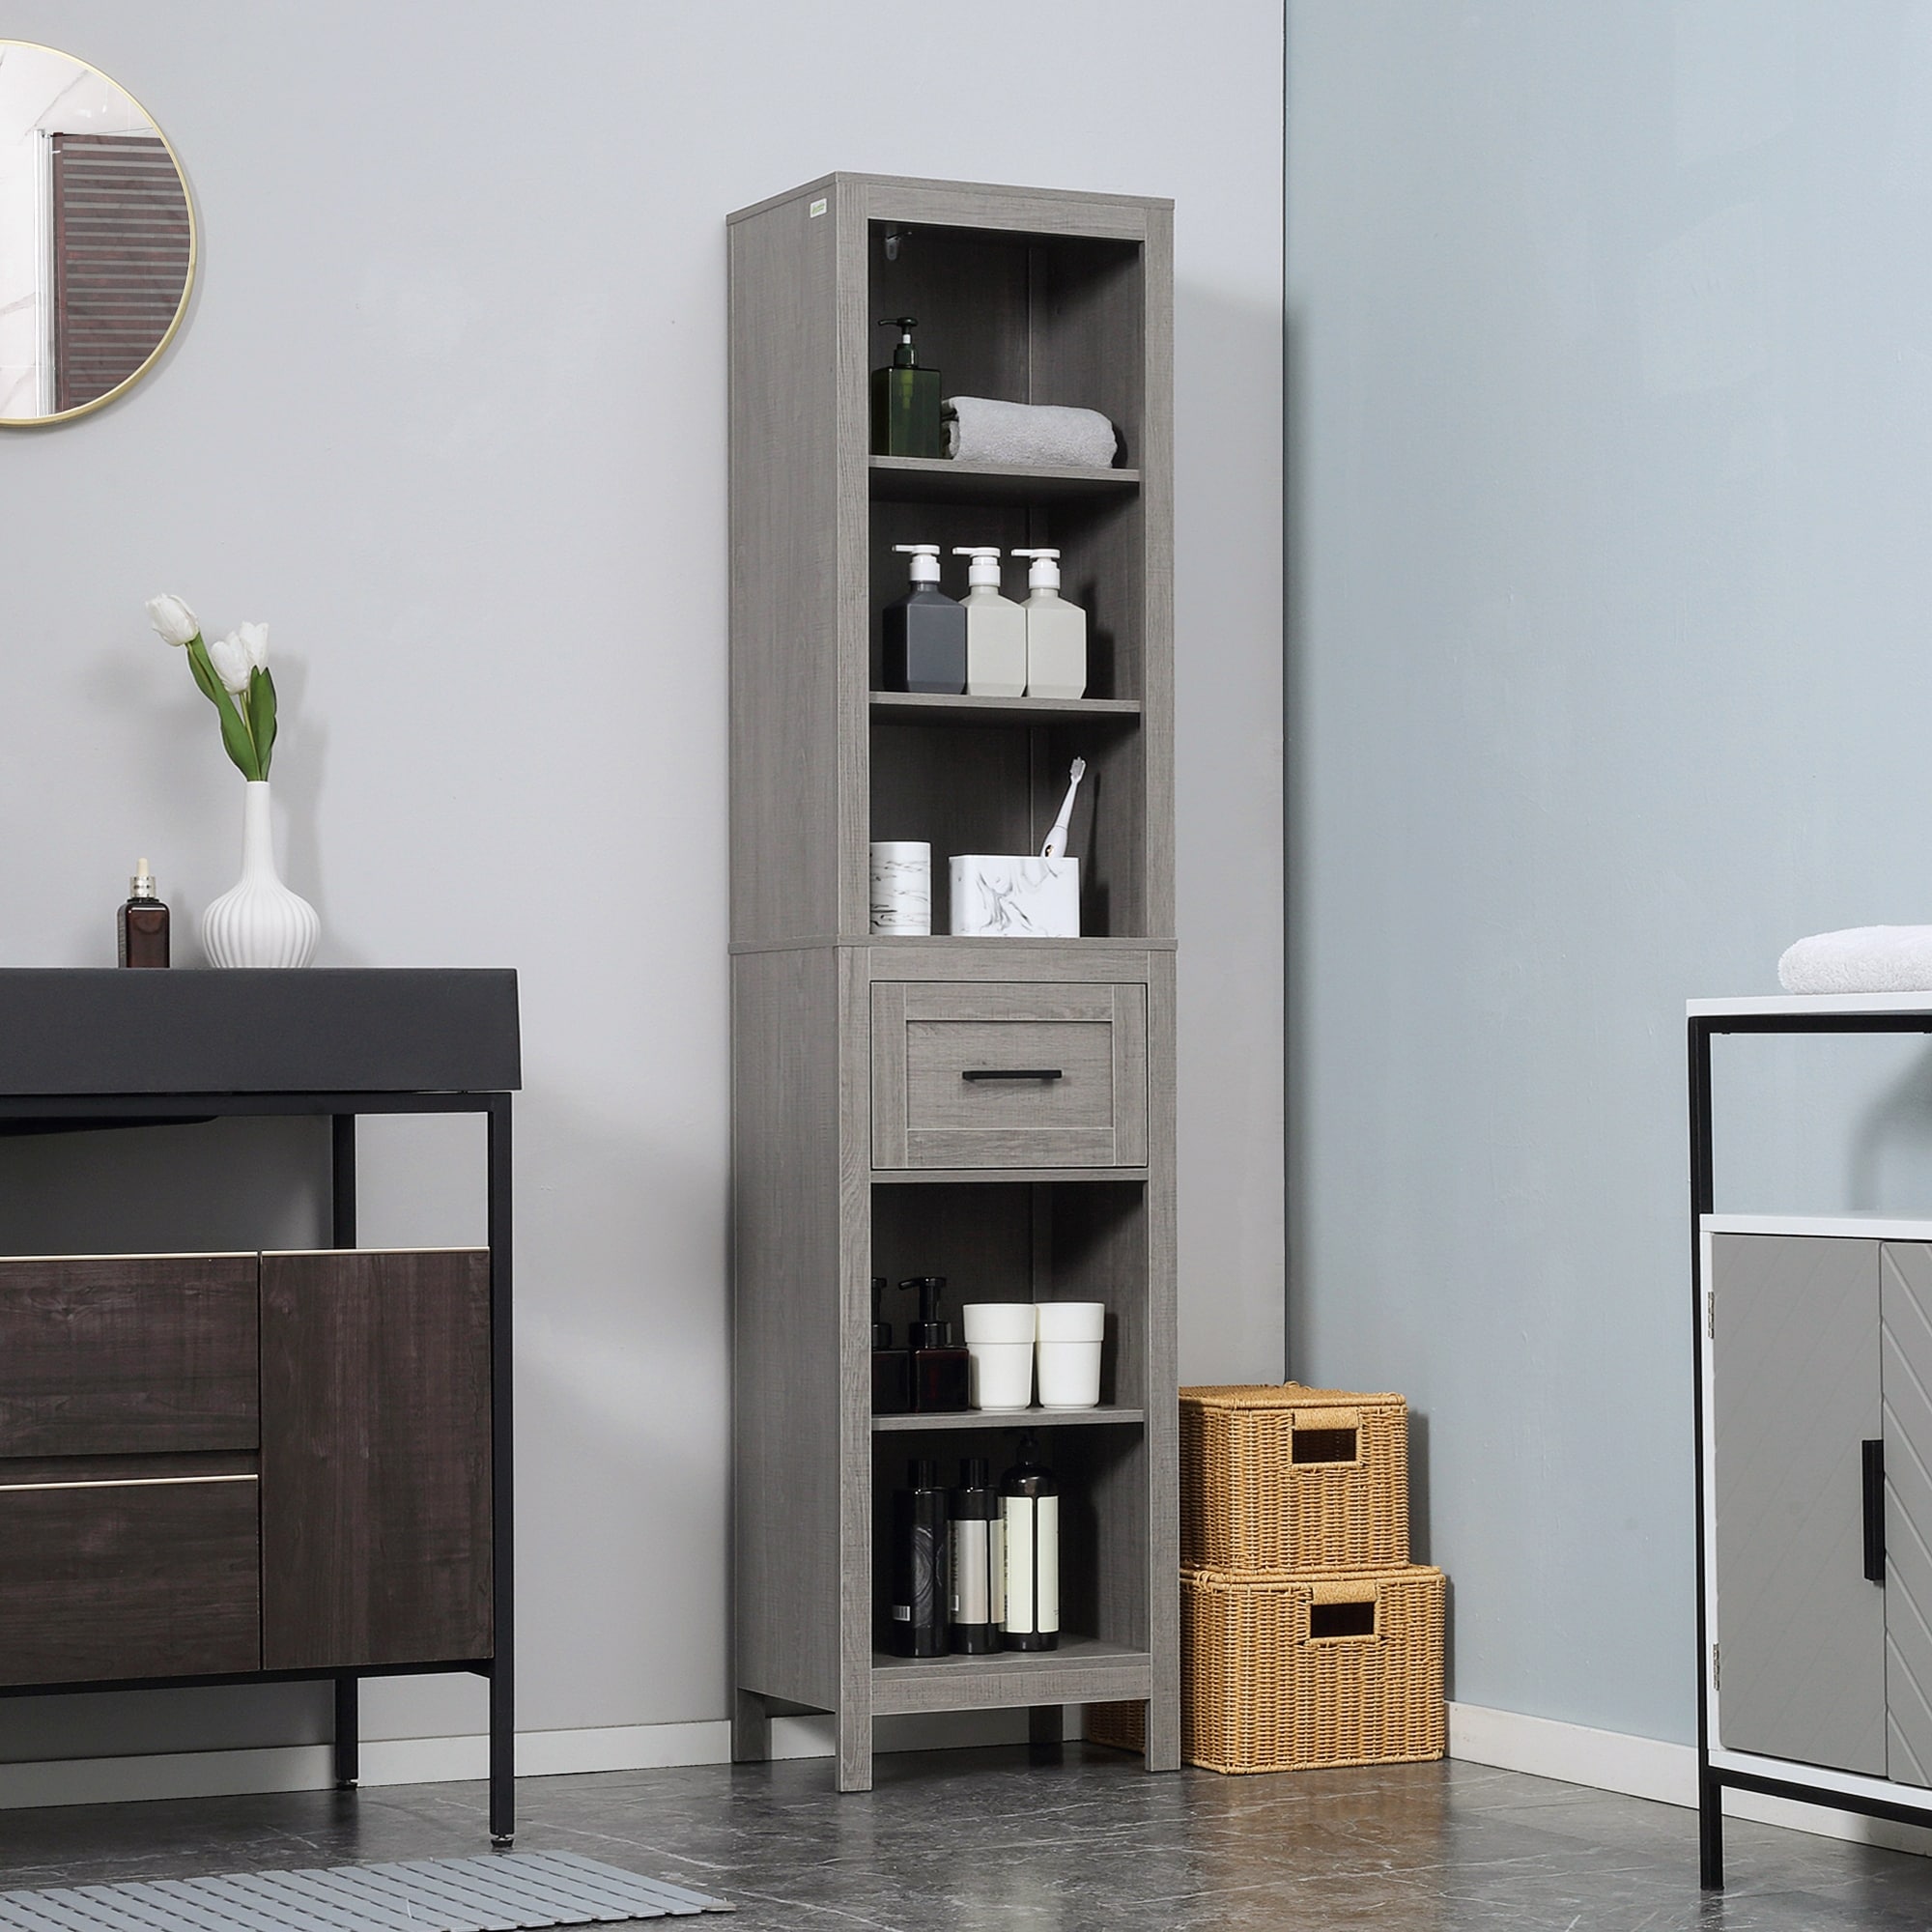 https://ak1.ostkcdn.com/images/products/is/images/direct/2503d899076f48a8526414684ef78bd1faaf3ae8/kleankin-Narrow-Bathroom-Storage-Cabinet-with-Drawer-and-5-Tier-Shelf%2C-Tall-Cupboard-Freestanding-Linen-Towel%2CCorner-Organizer.jpg